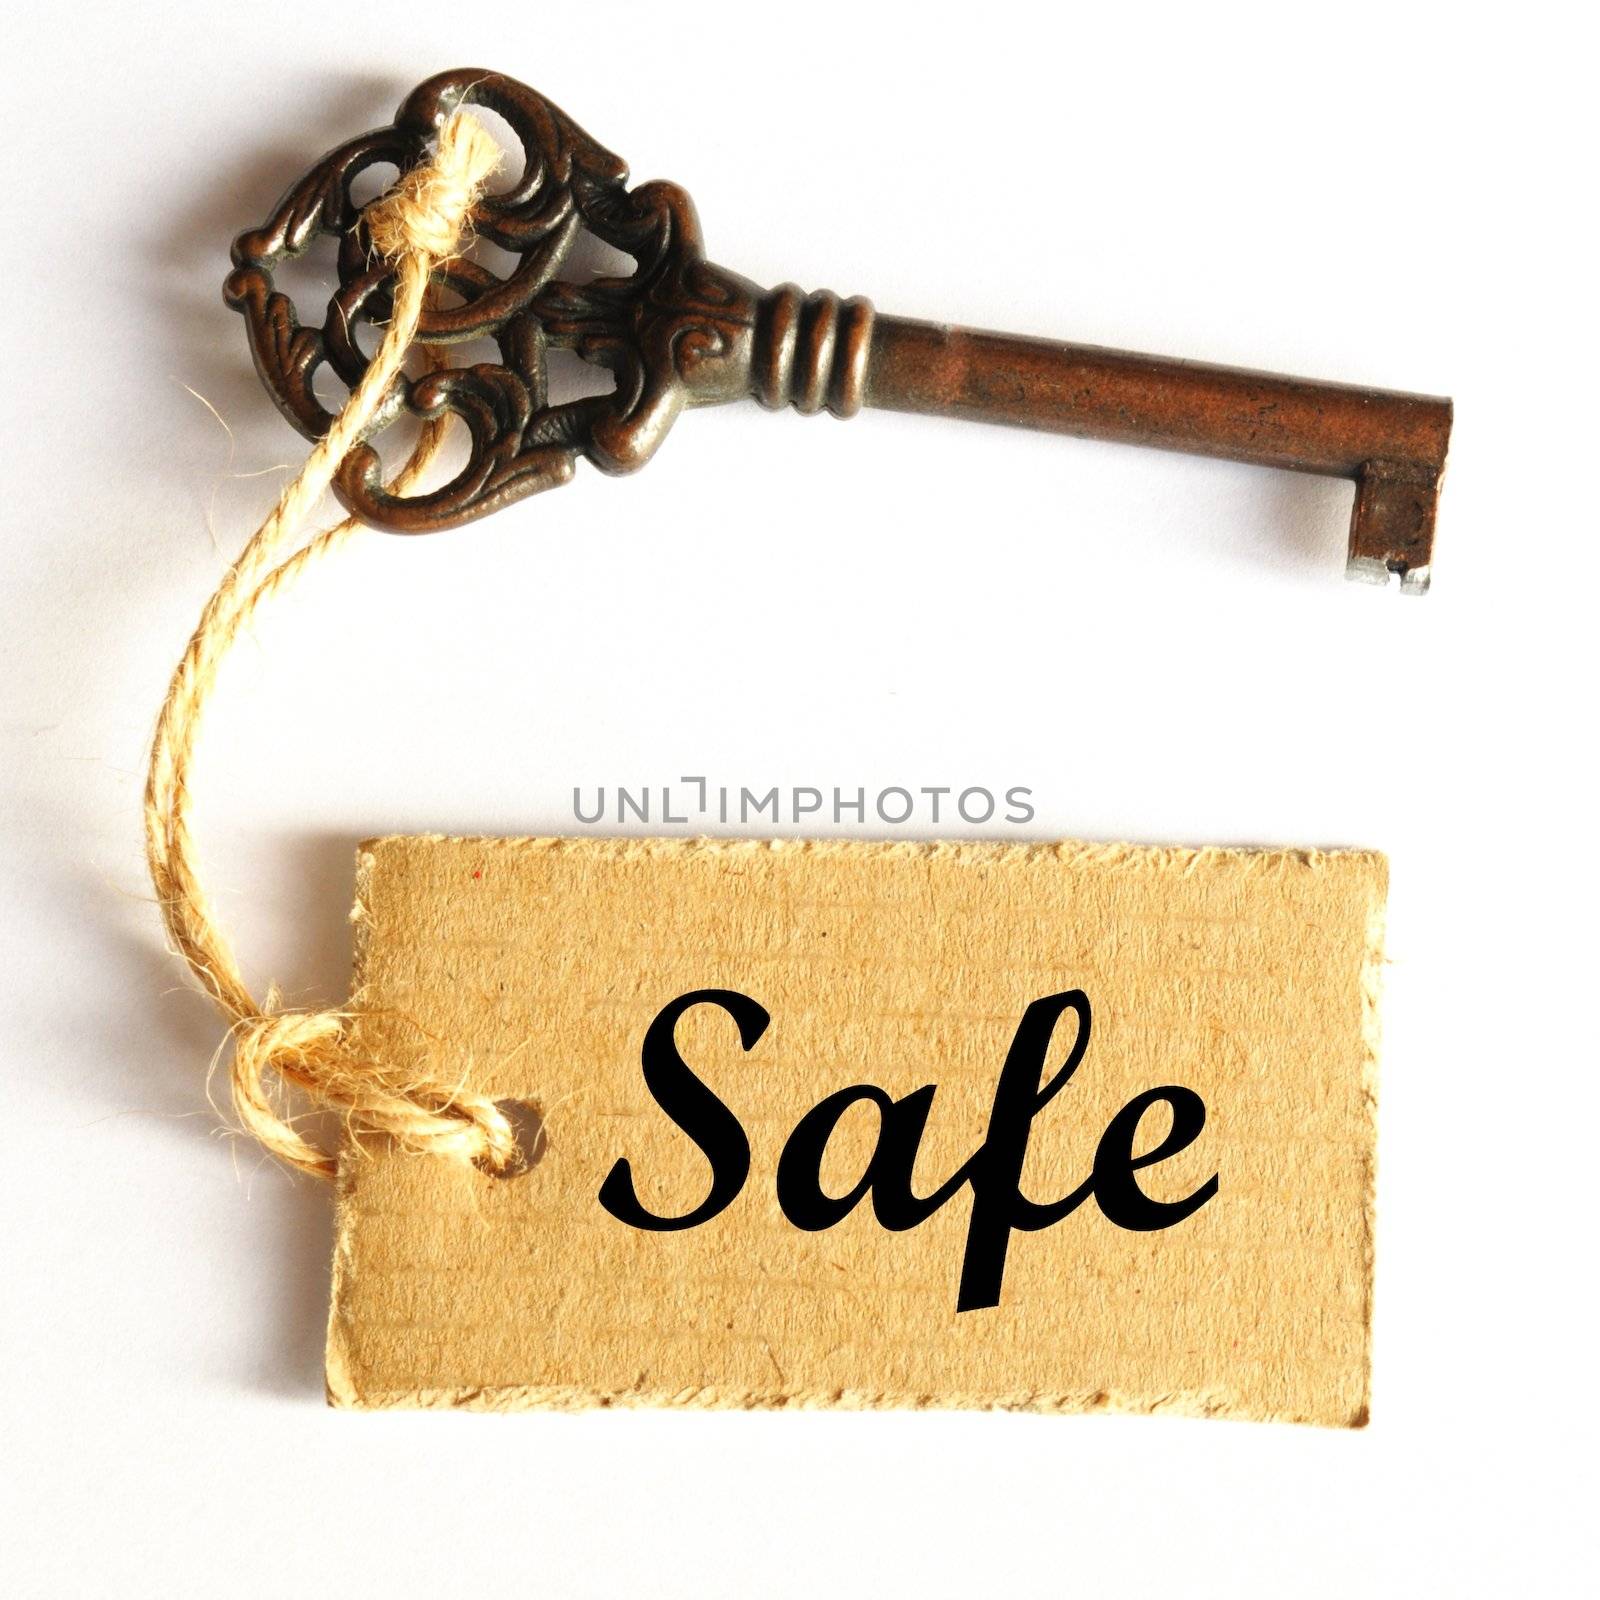 safe concept with key and label showing secure investment